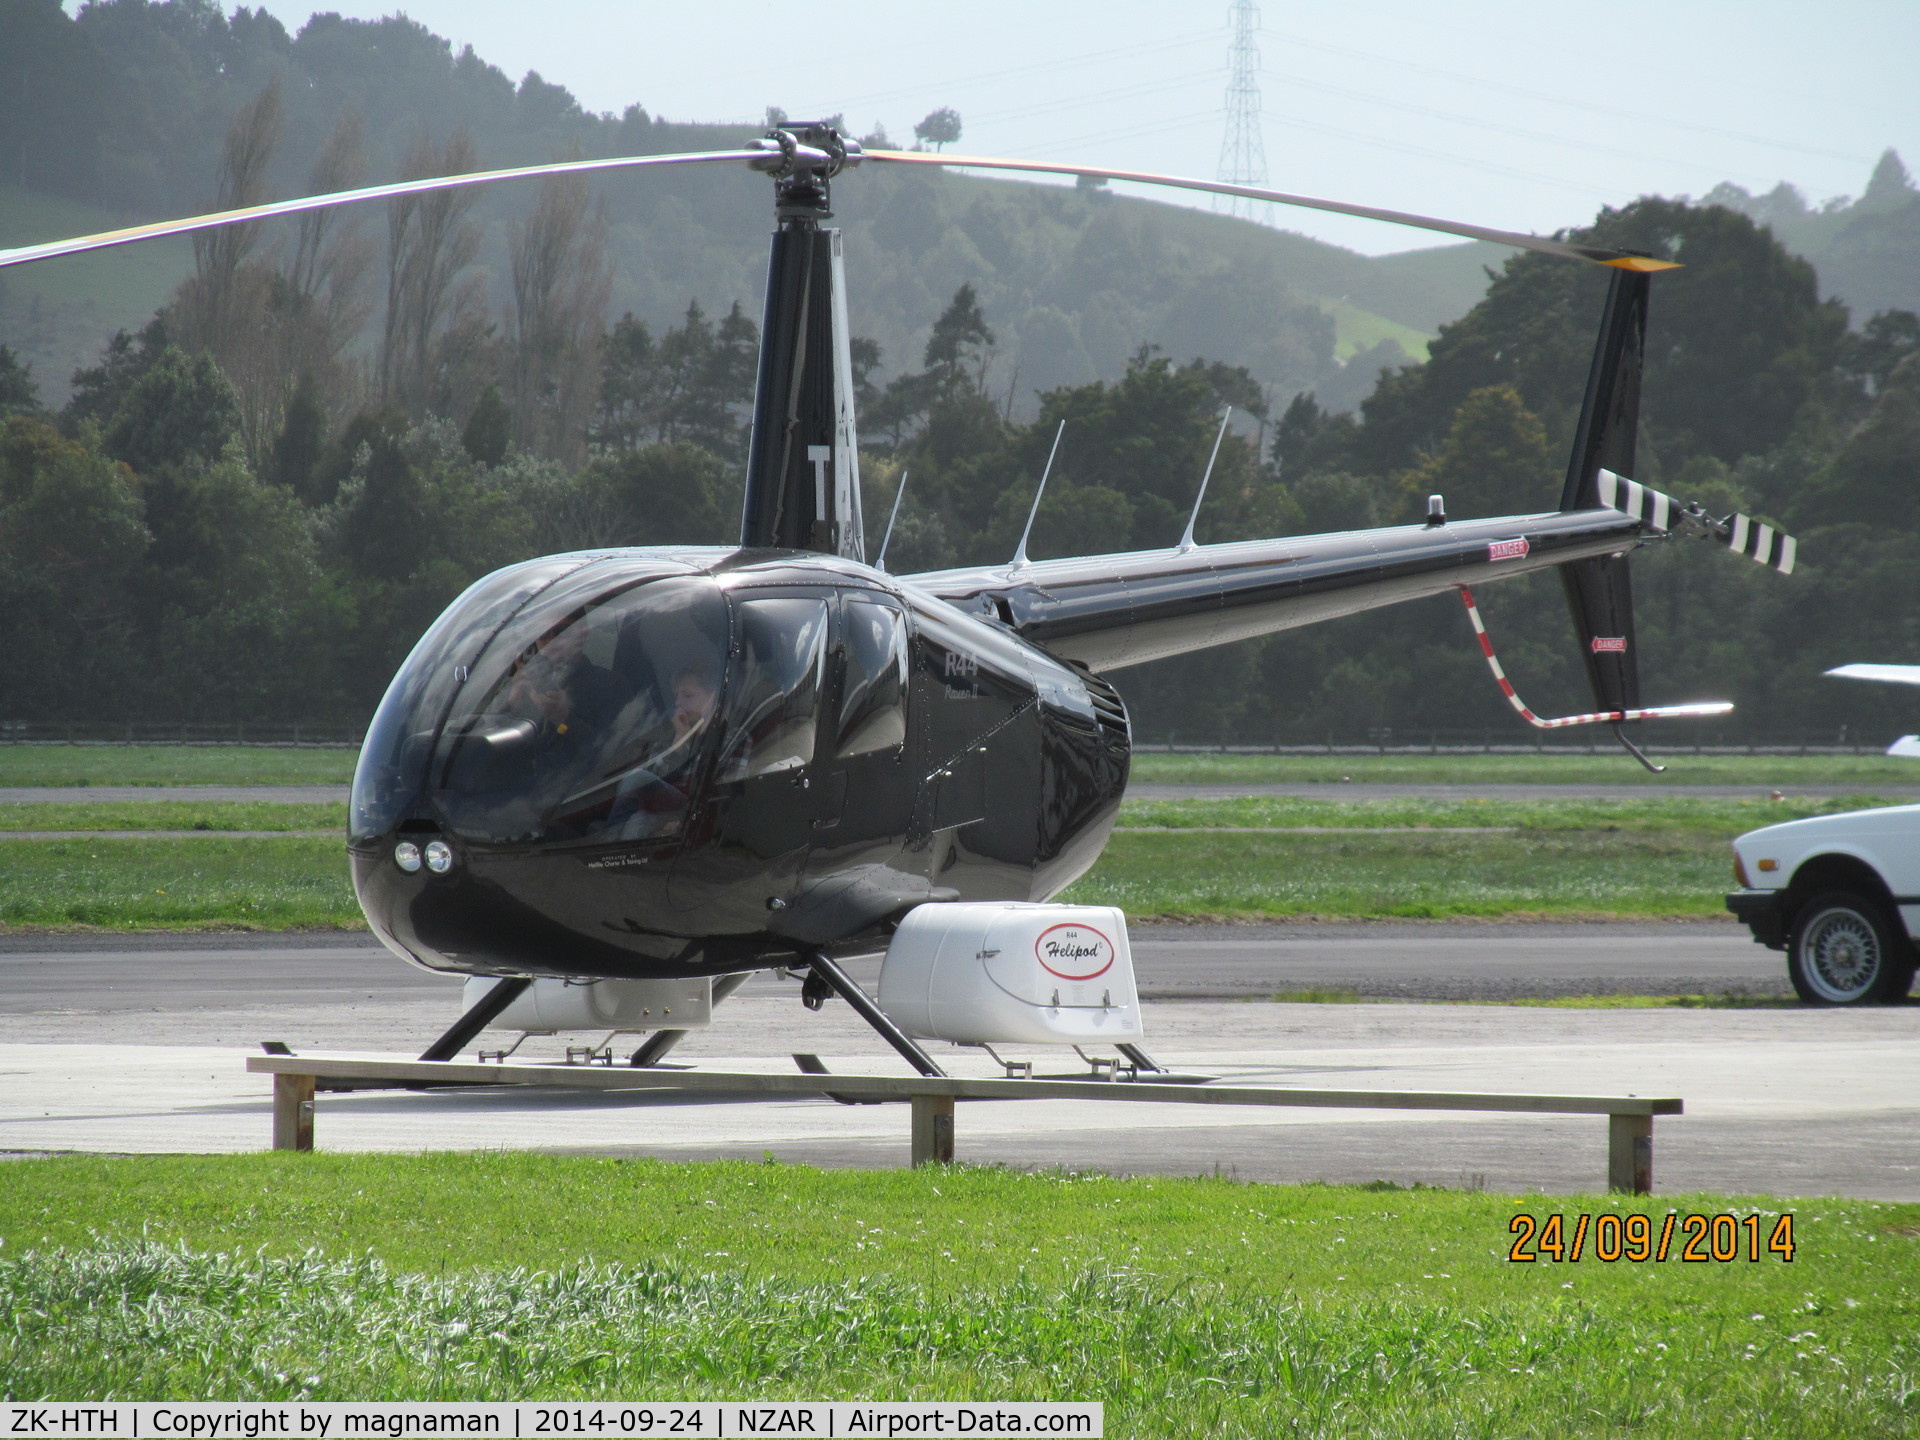 ZK-HTH, 2013 Robinson R44  Raven II C/N 13529, New one for me at Ardmore - nice pods